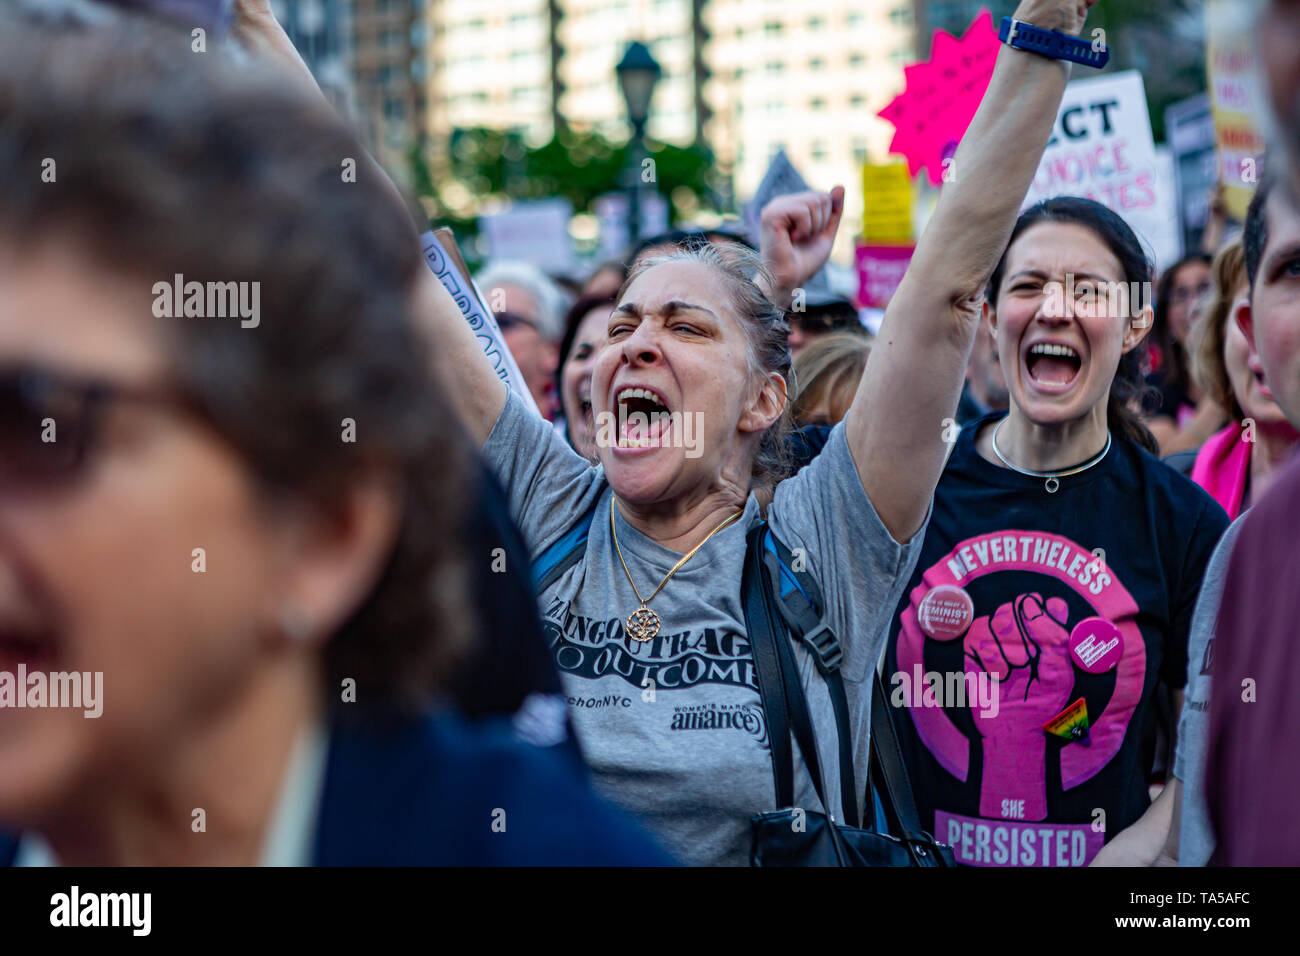 New York City, United States. 21st May, 2019. On May 21, 2019, hundreds in New York City, and thousands across the country rallied on a national day of action against Trump's anti-choice movement. Trump and Republican legislators have been orchestrating a national effort to take away peoples' right to access abortion. The most extreme ban yet, in Alabama, became law, following radical bans in Indiana and Ohio. Credit: Michael Nigro/Alamy Live News Stock Photo